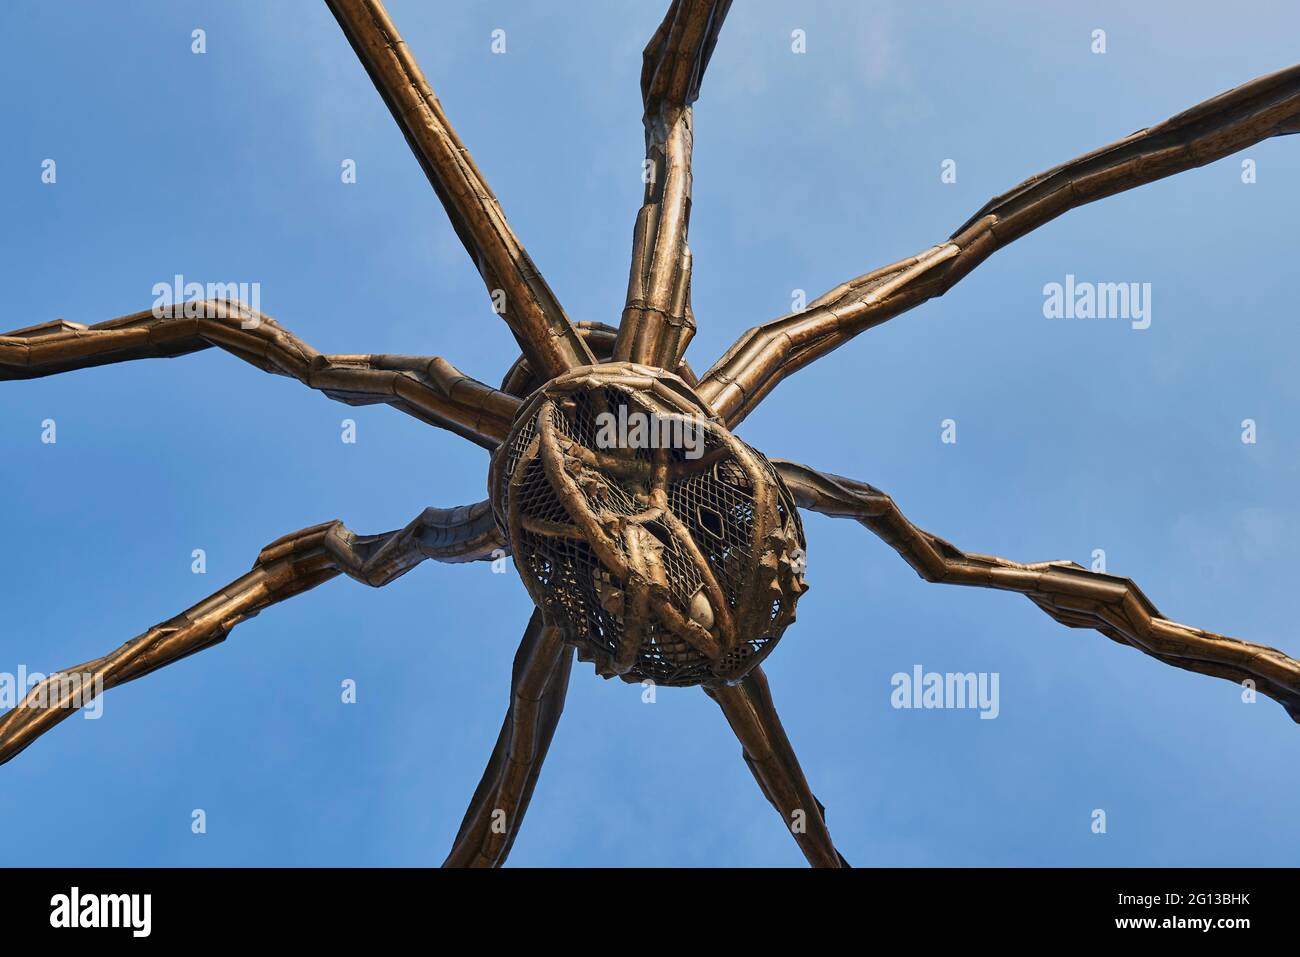 Maman - Spider sculpture by the artist Louise Bourgeois in front of The Guggenheim Museum in Bilbao, Biscay, Basque Country, Spain. Stock Photo